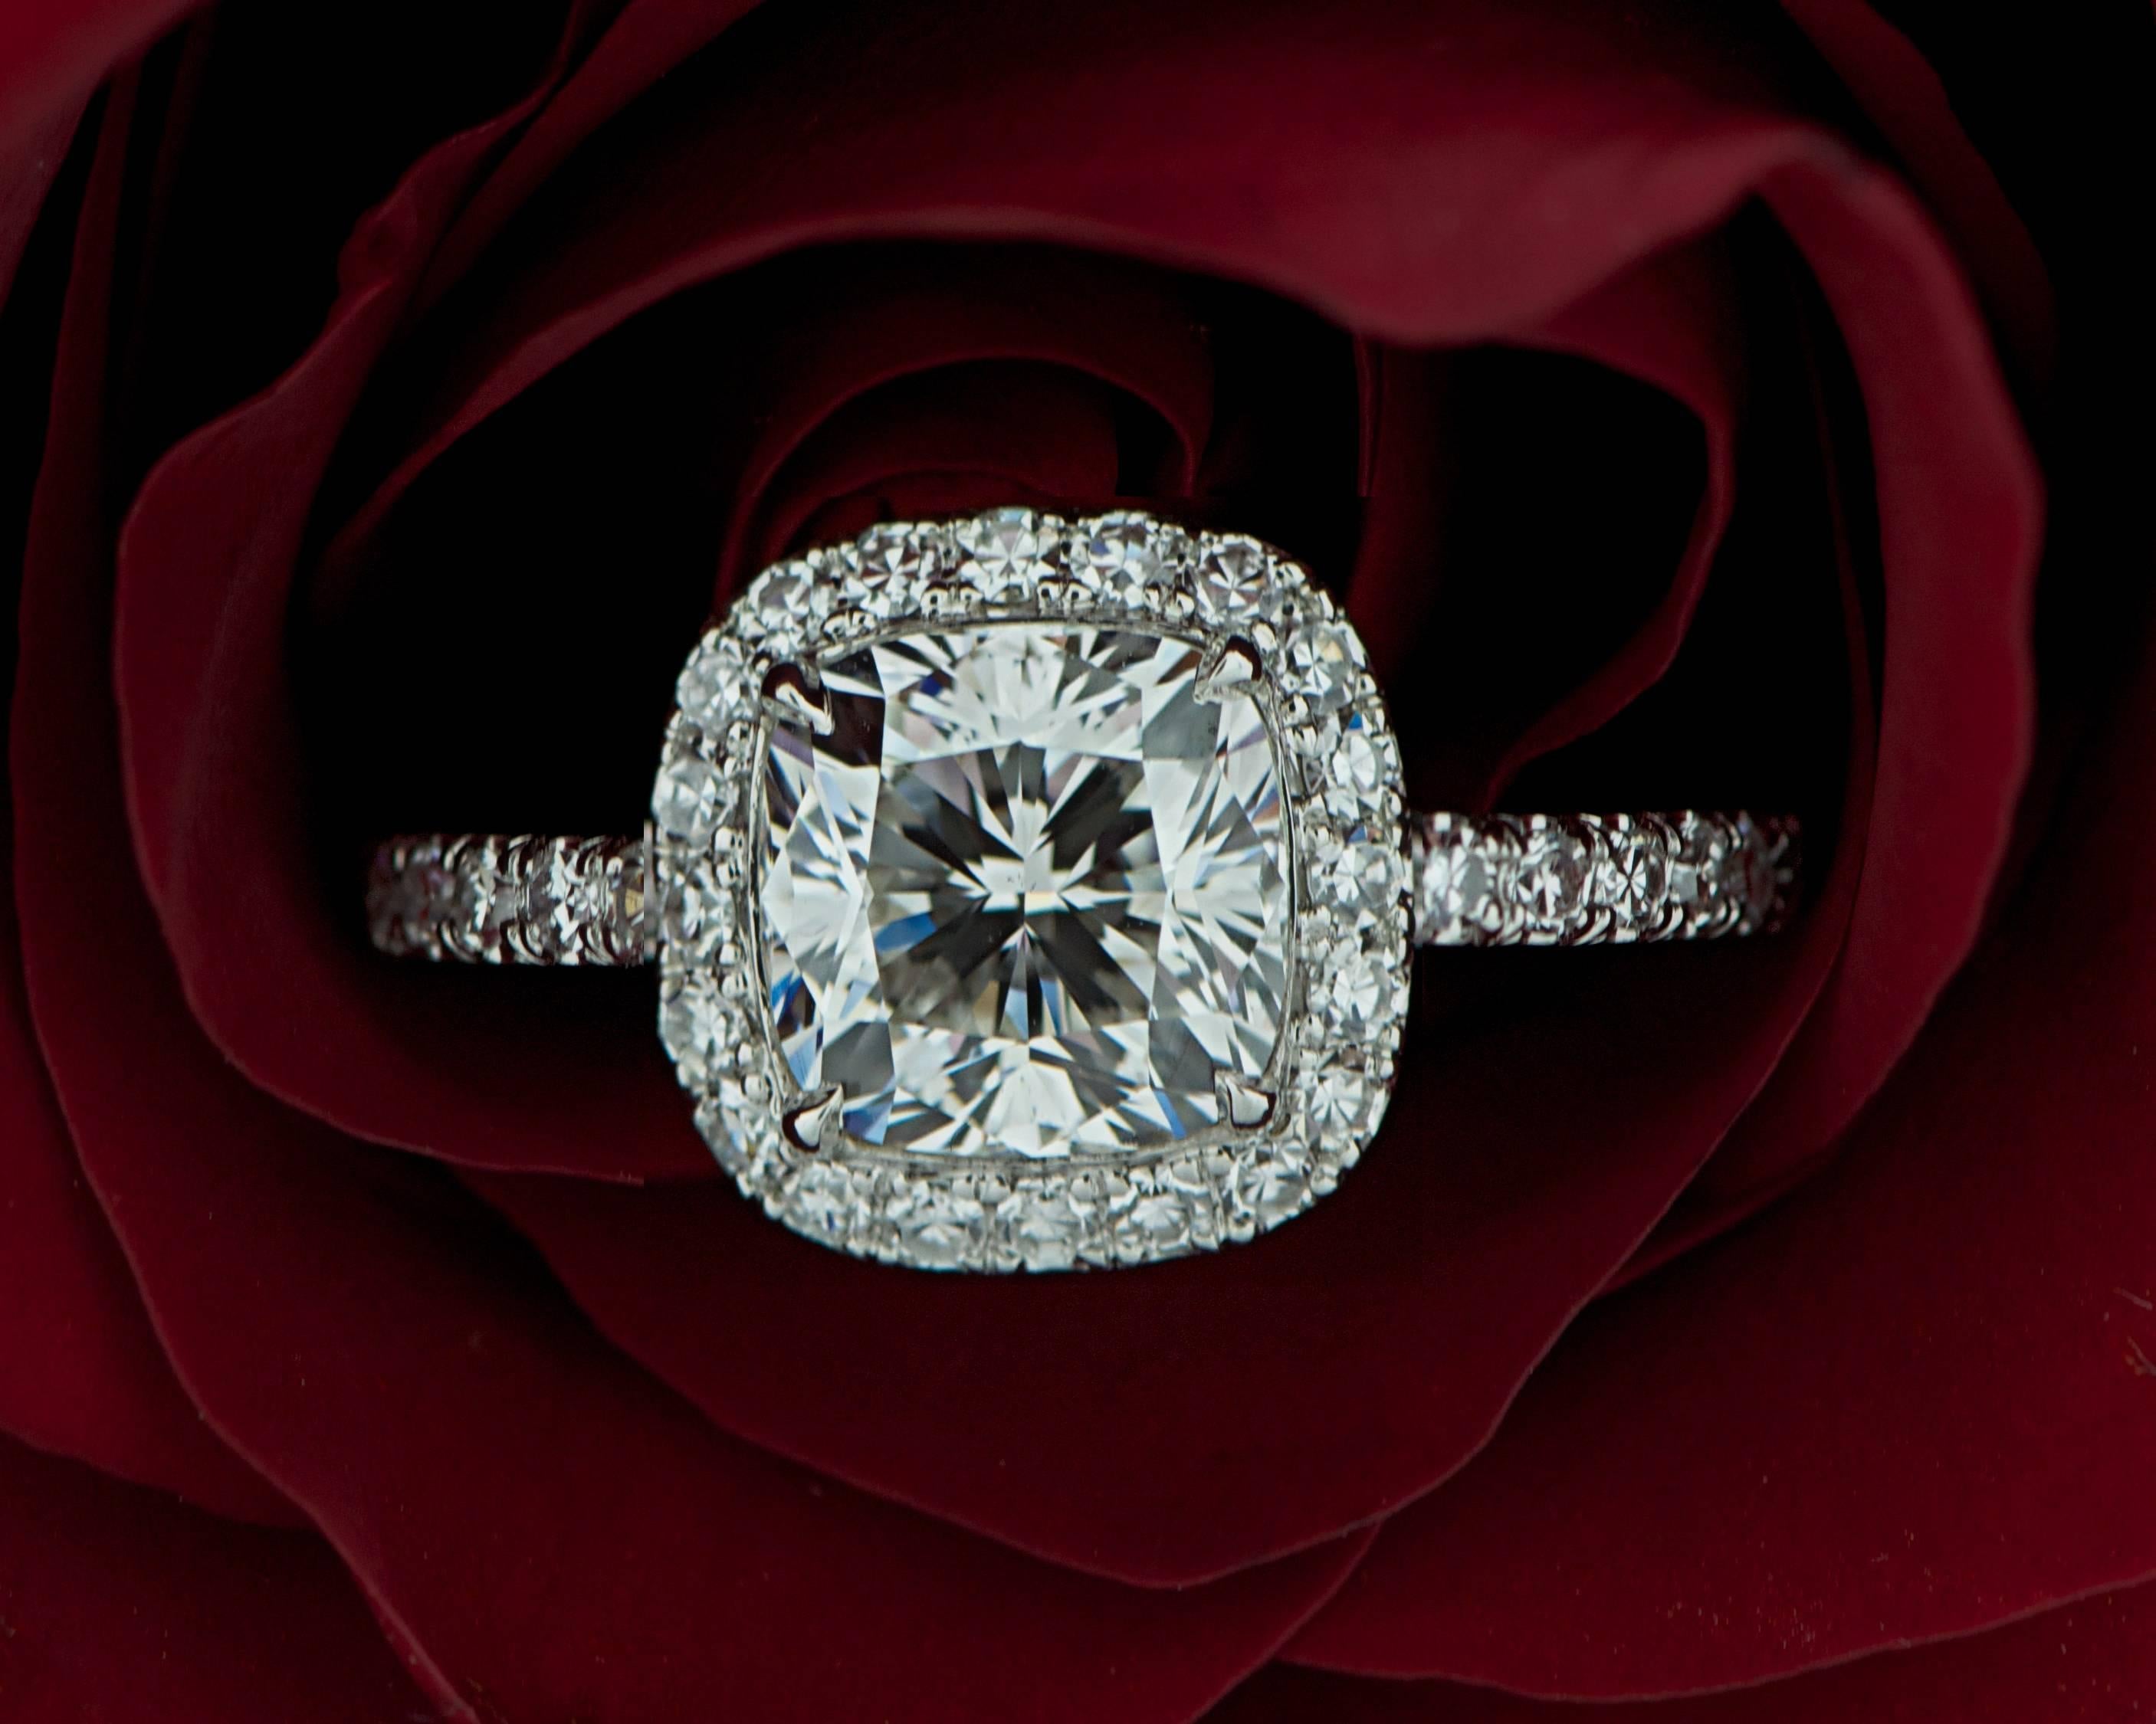 Marisa Perry micro pave diamond engagement ring in platinum. Ring features a Cushion Cut diamond with a diamond halo with diamond micro pave going three quarters of the way down the shank. 

Created by Haute Jewelry Designer Douglas Elliott for